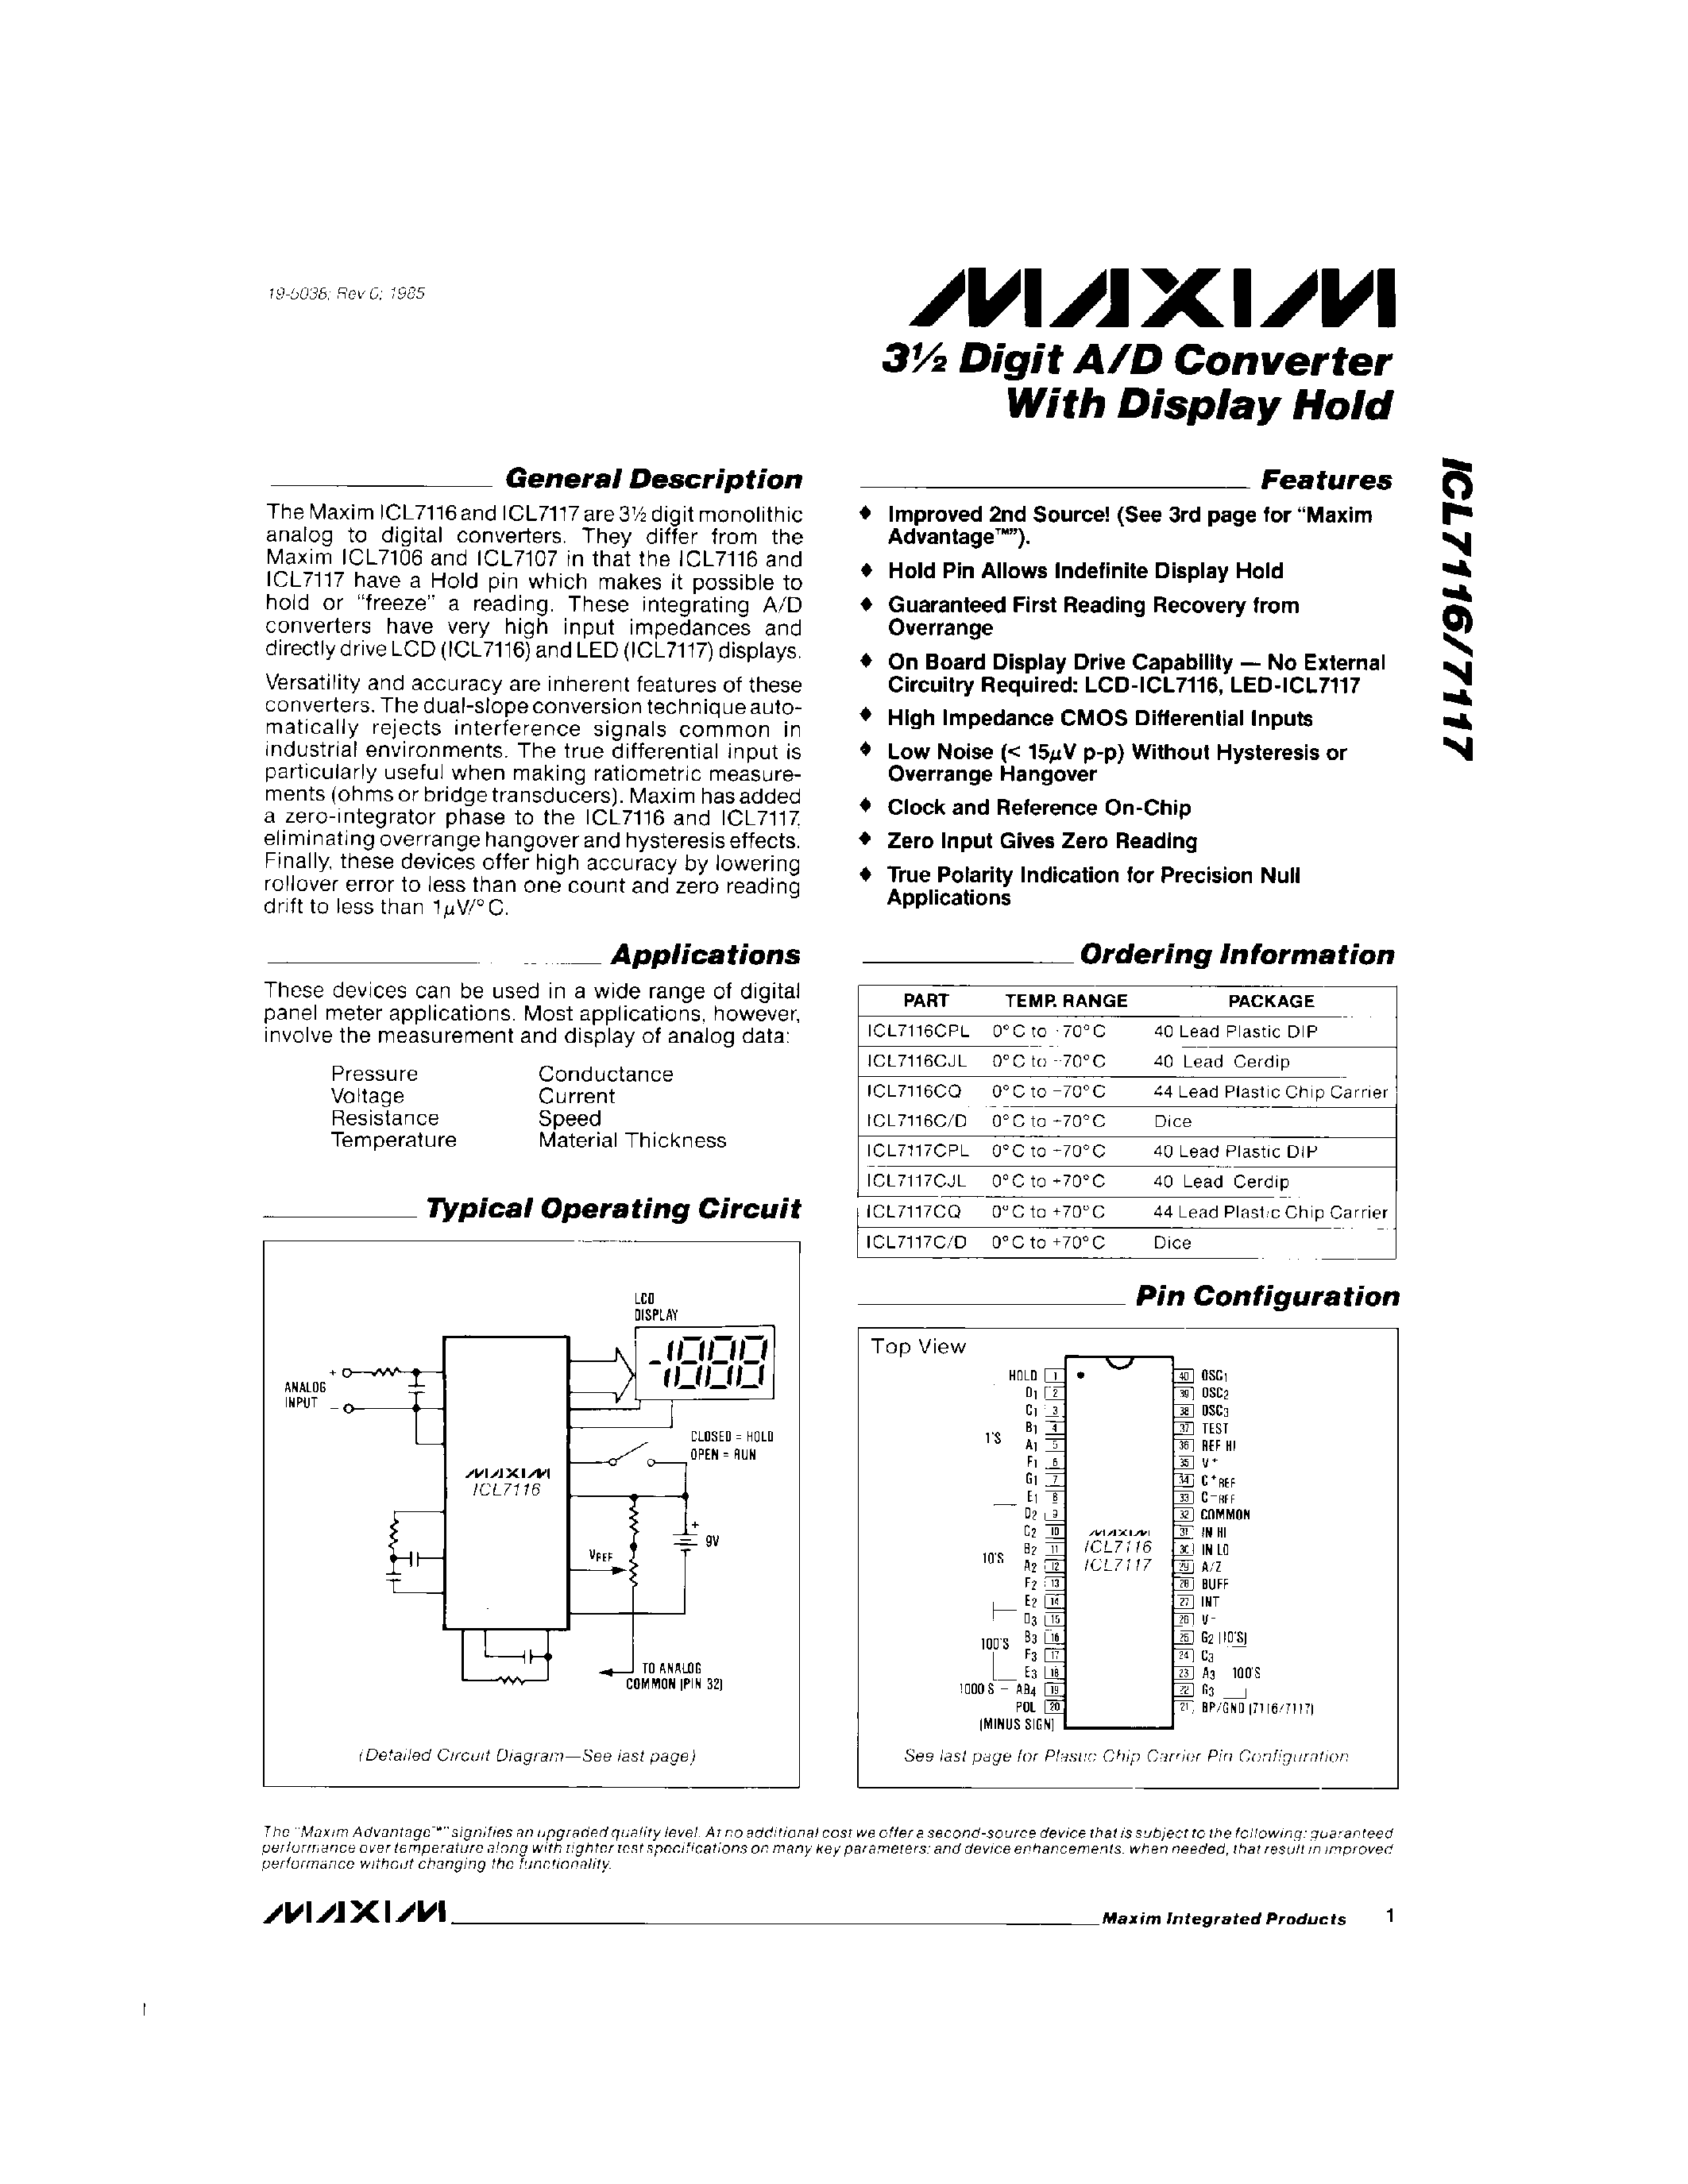 Datasheet ICL7117C/D - 3 Digit A/D Converter With Display Hold page 1